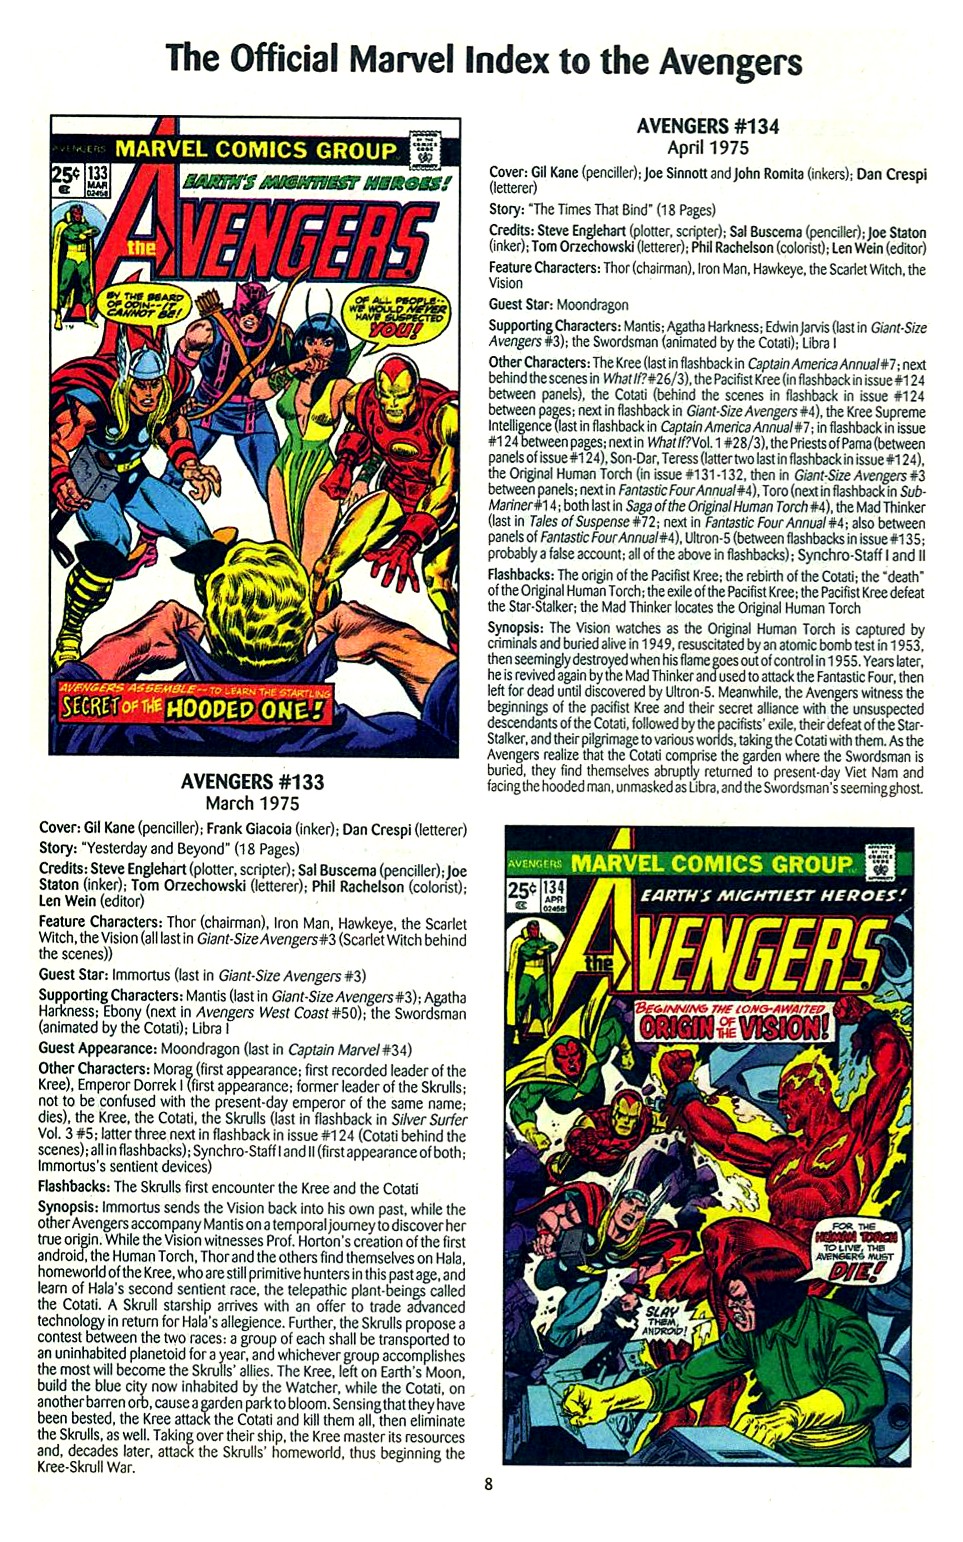 Read online The Official Marvel Index to the Avengers comic -  Issue #3 - 10